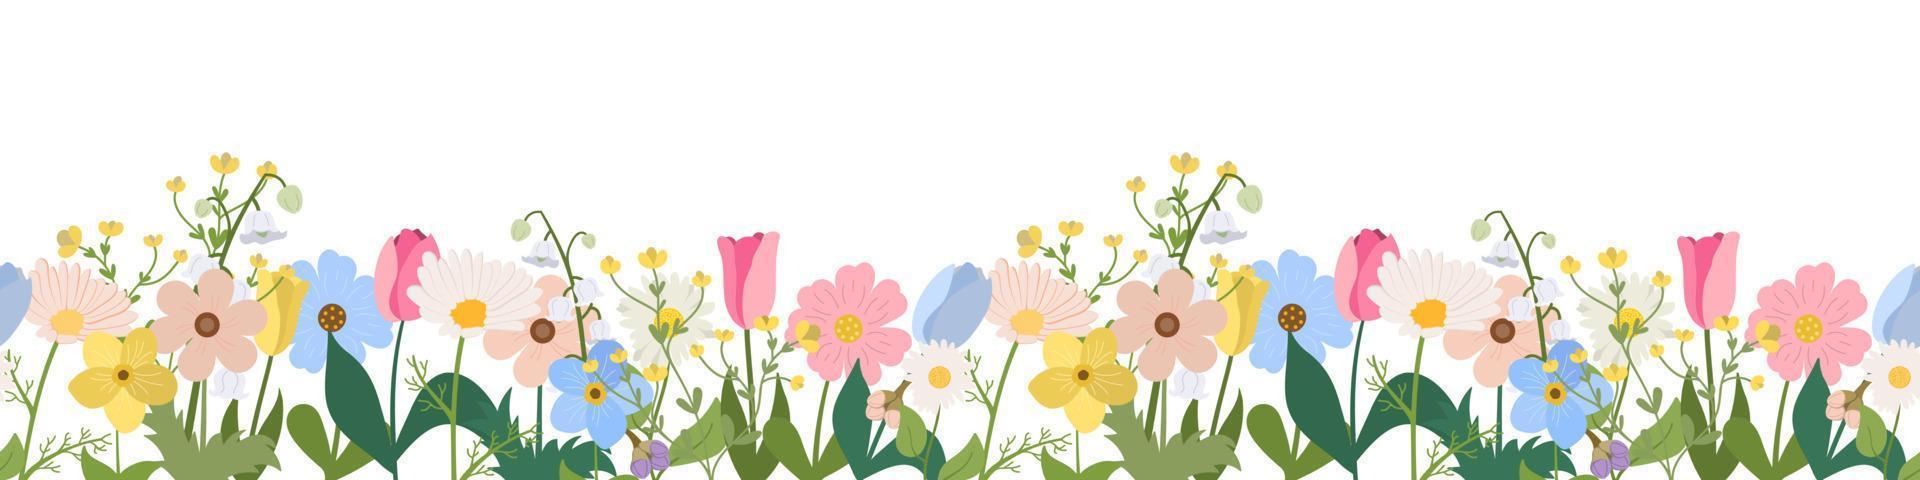 Spring or summer seamless horizontal border with blooming flowers on white background. Multicolored garden flowers in row. Banner with floral pattern. vector